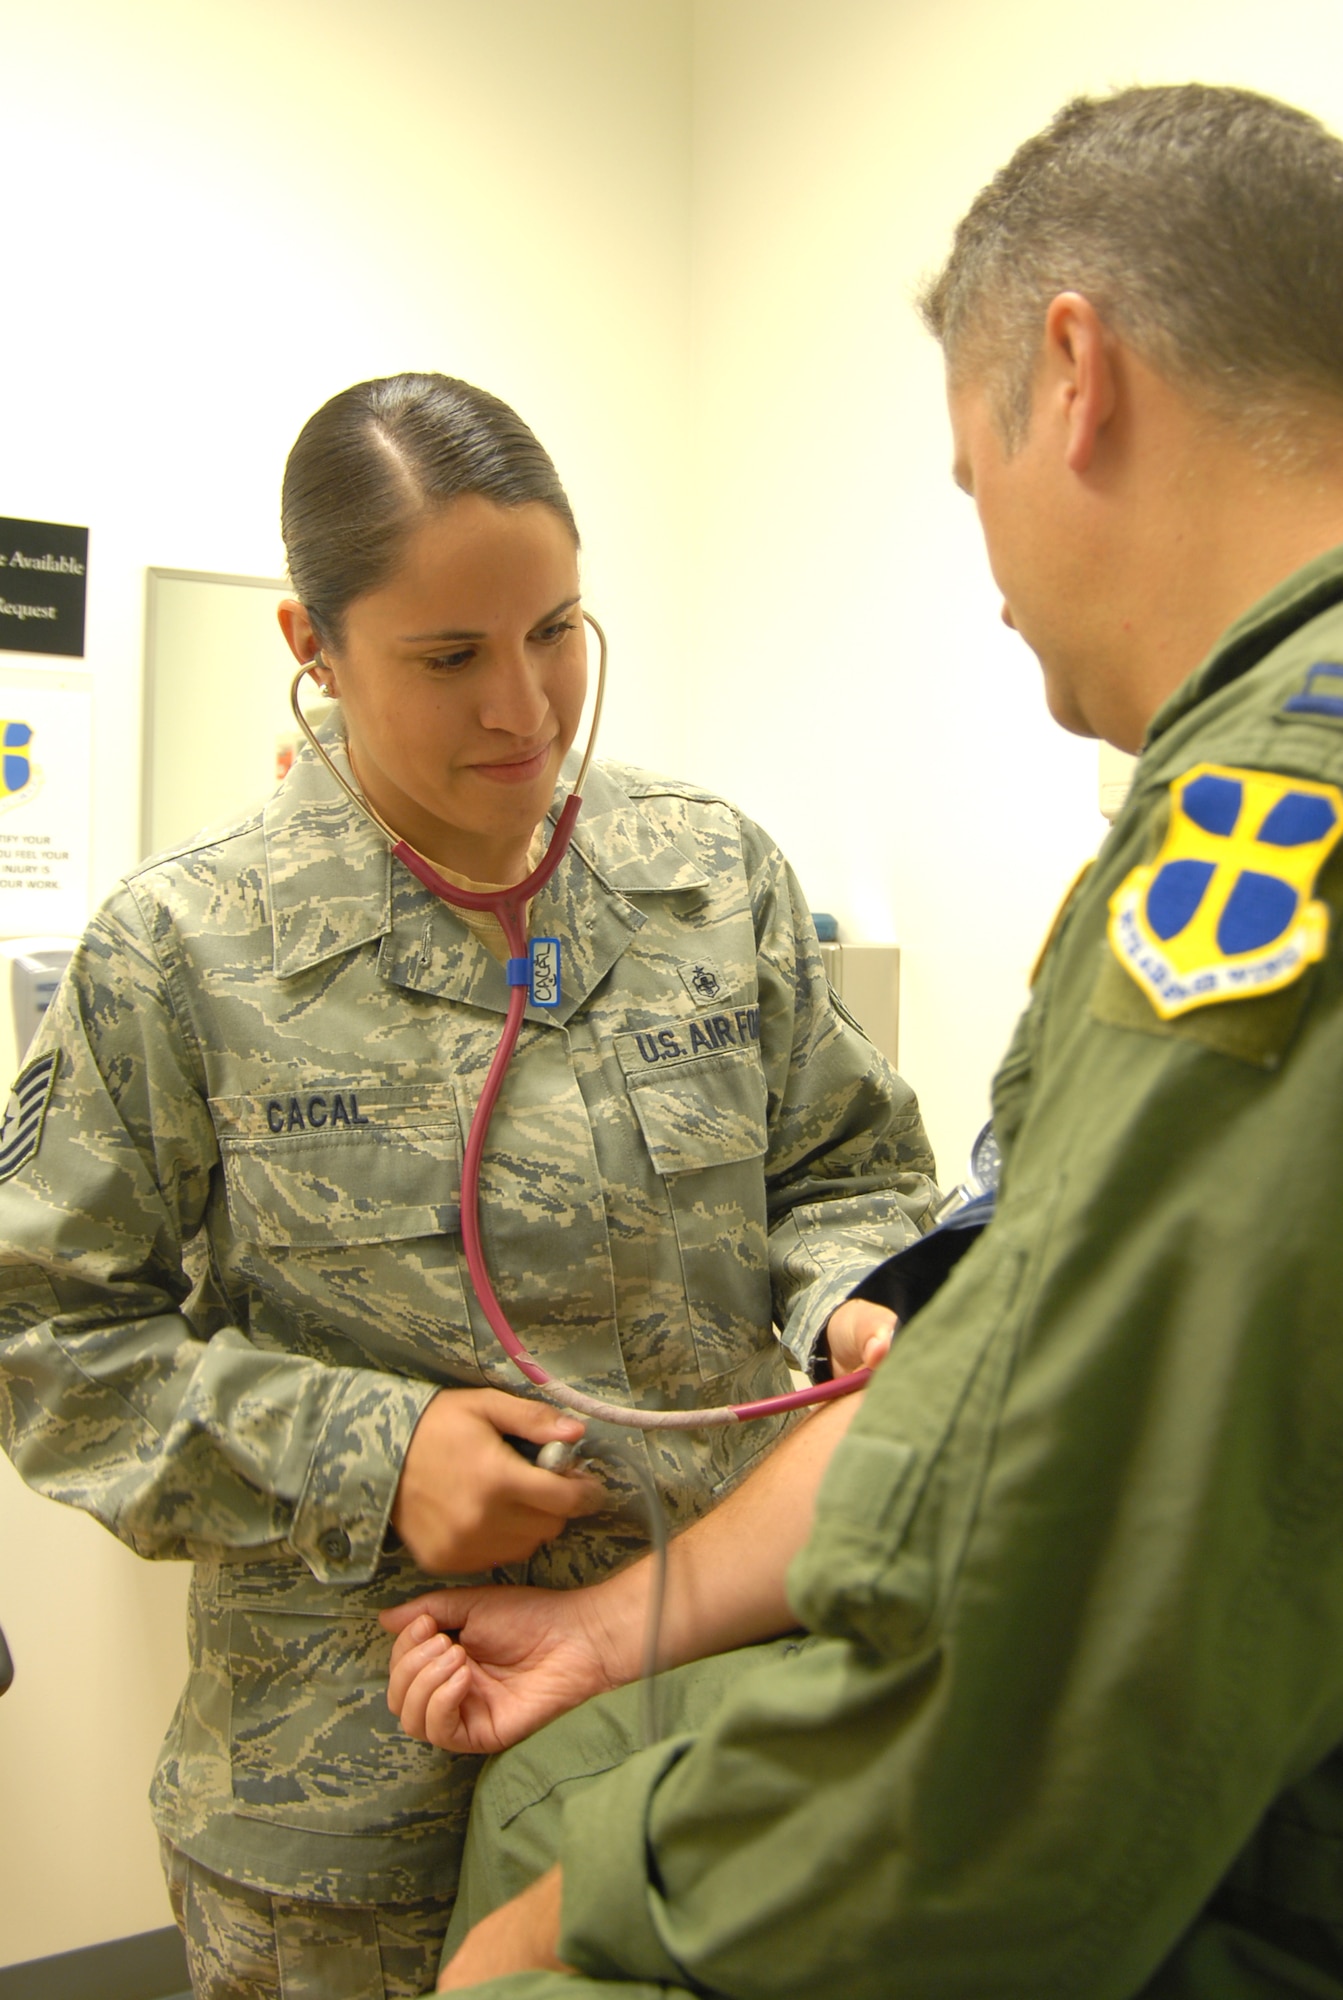 Tech. Sgt. Julianne Cacal, 95th Aerospace Medicine Squadron independent duty medical technician, checks a patient's blood pressure. As an IDMT, Sergeant Cacal diagnoses and treats servicemembers under the license of a supervising doctor. (U.S. Air Force photo/Senior Airman Julius Delos Reyes)